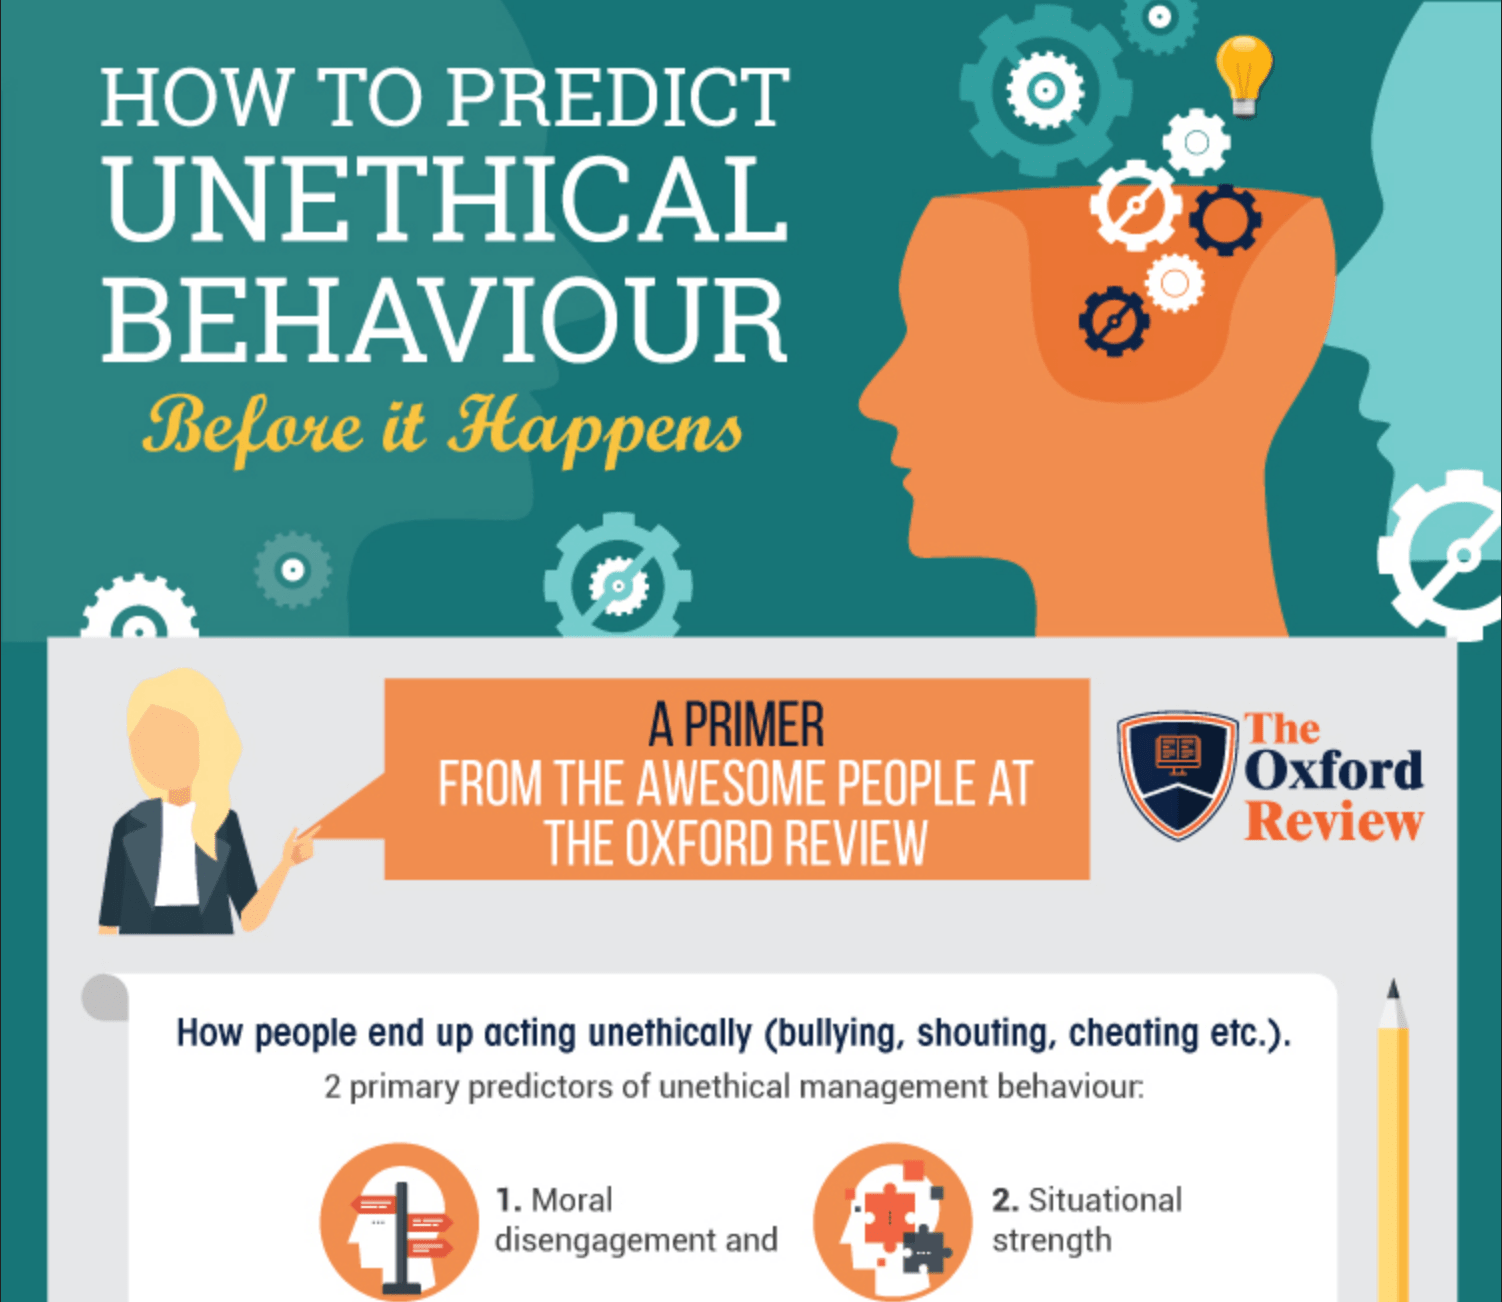 How to predict unethical behaviour infographic